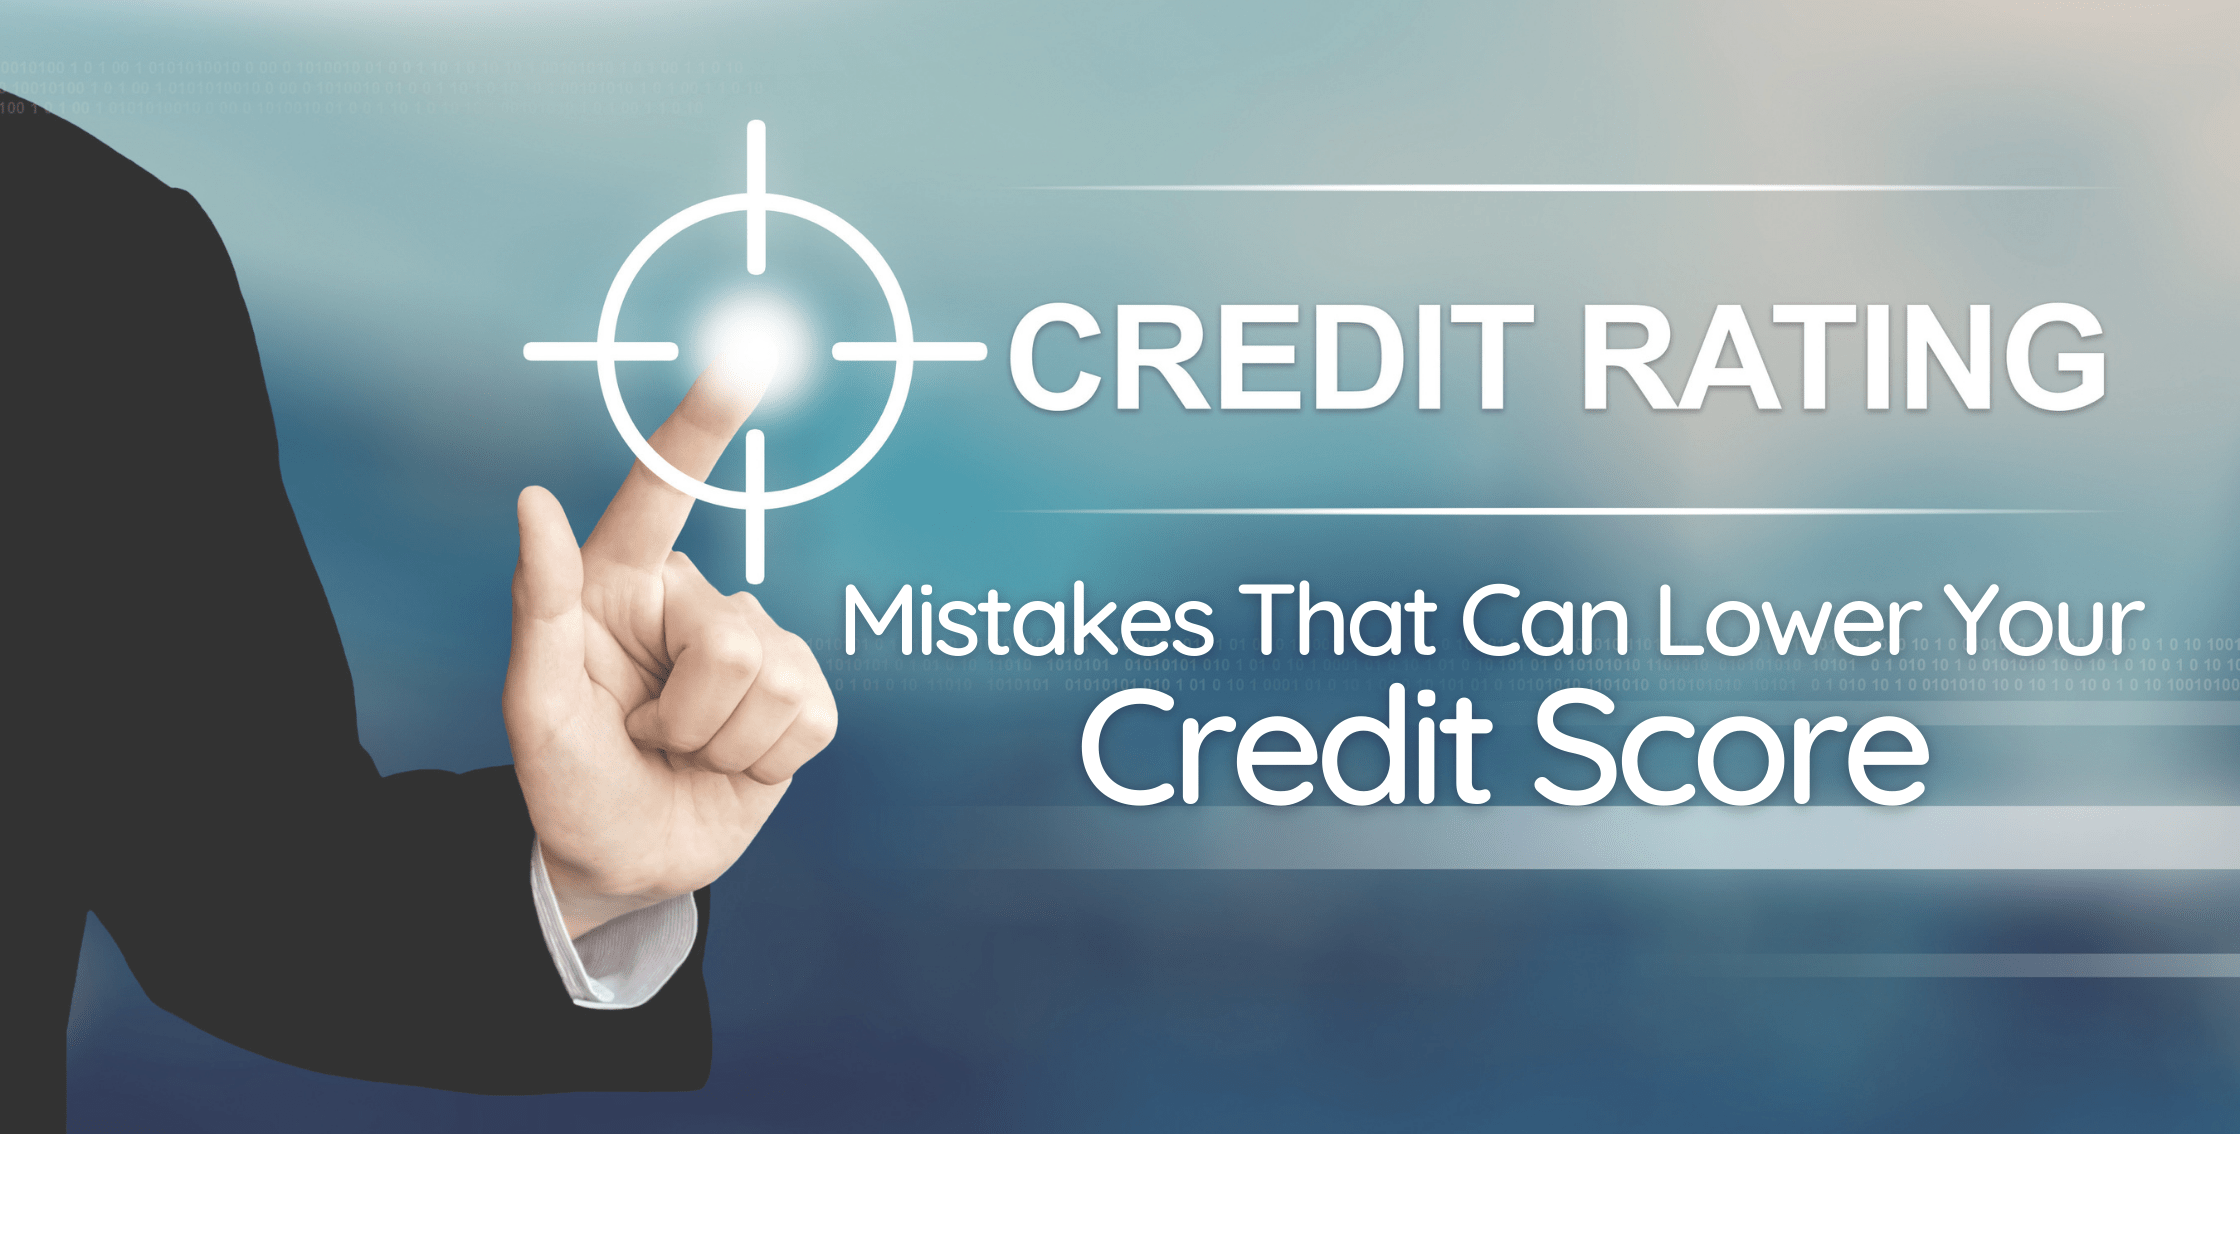 Bad Credit Score mistakes